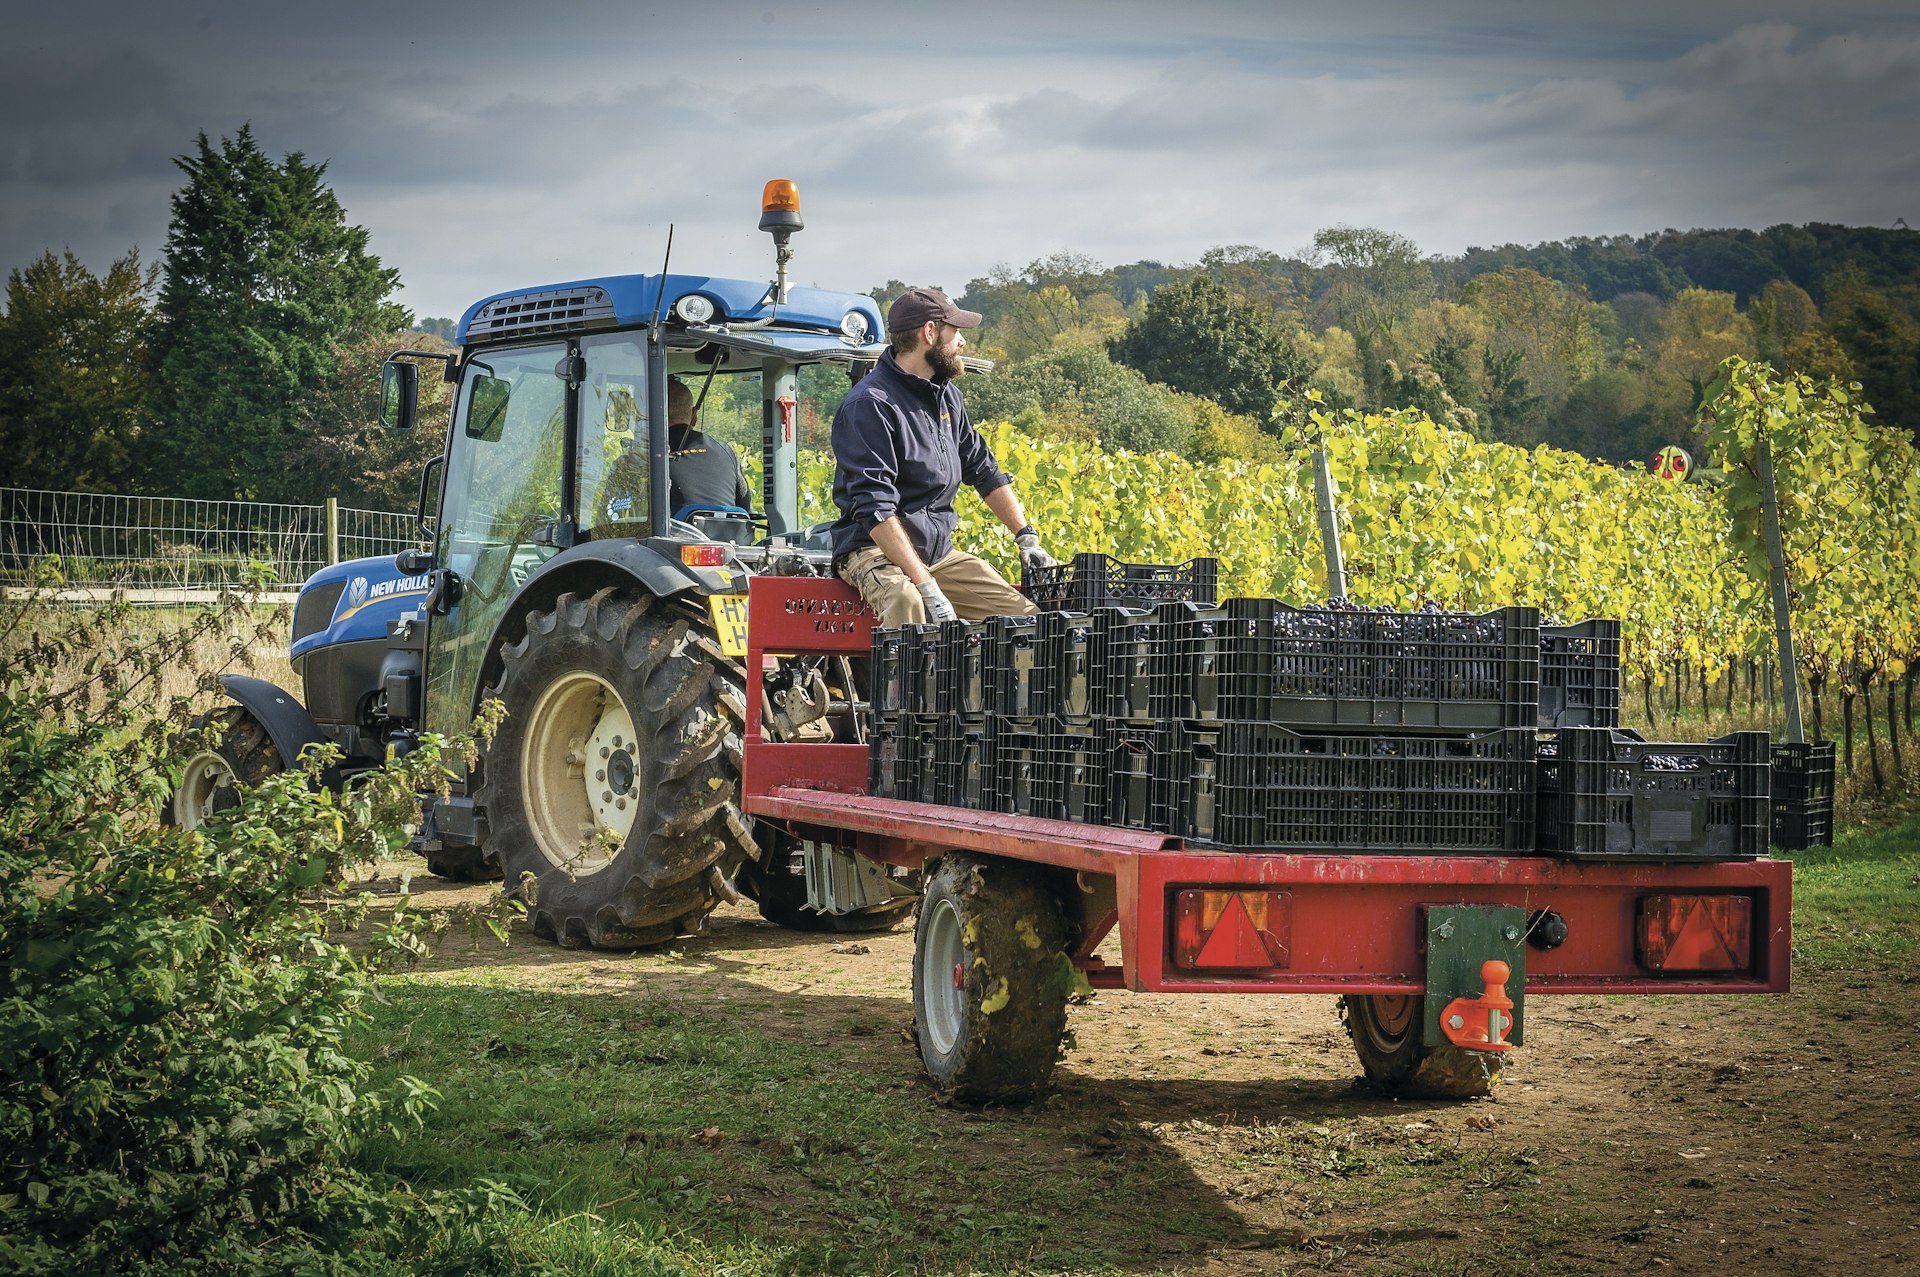 A man sits on a tractor with a trailer full of freshly harvested grapes